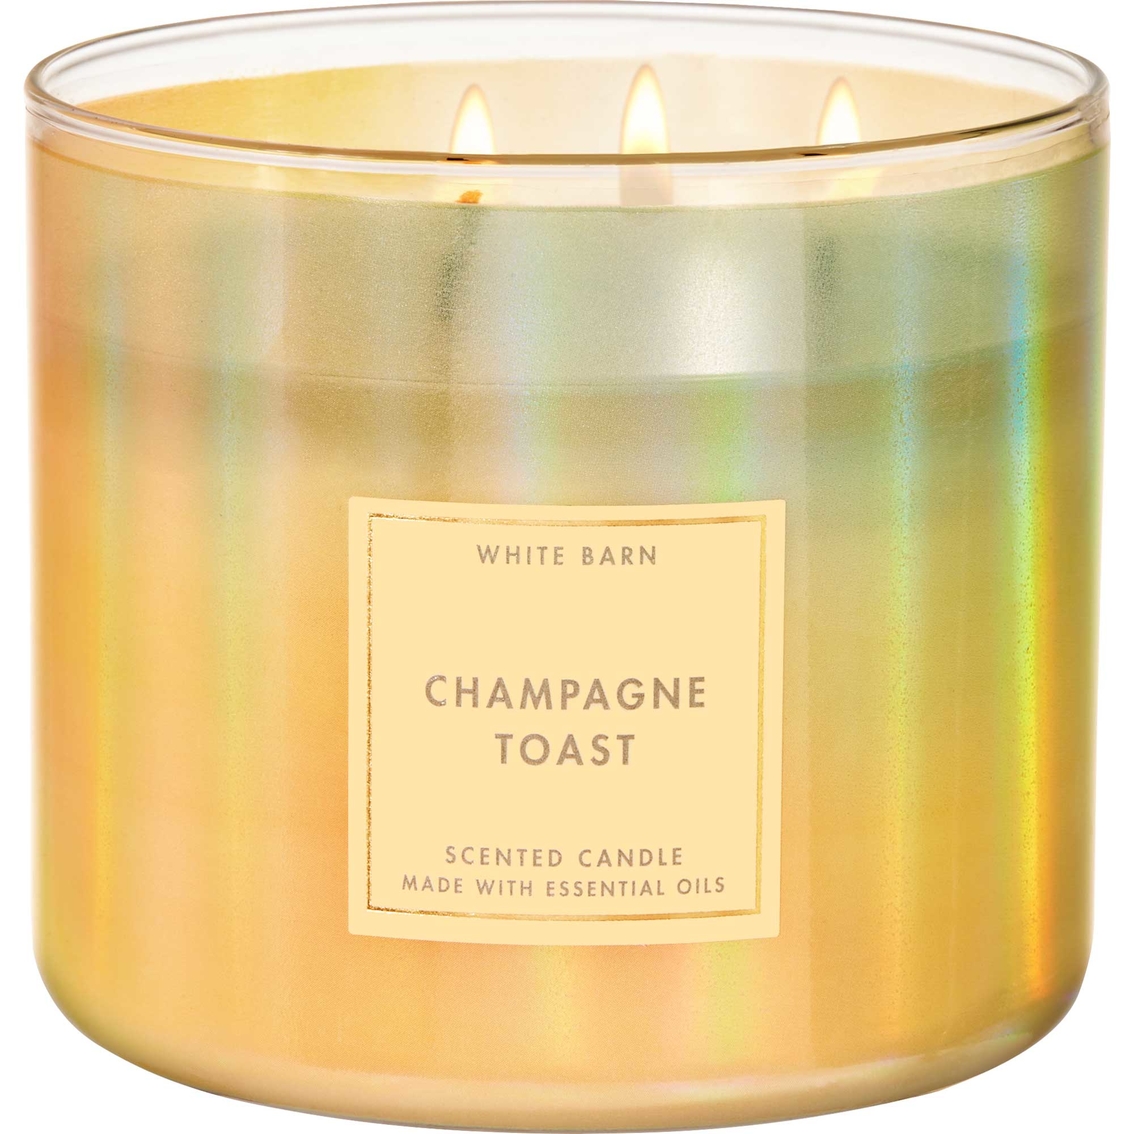 Champagne Toast 3 Wick Candle 